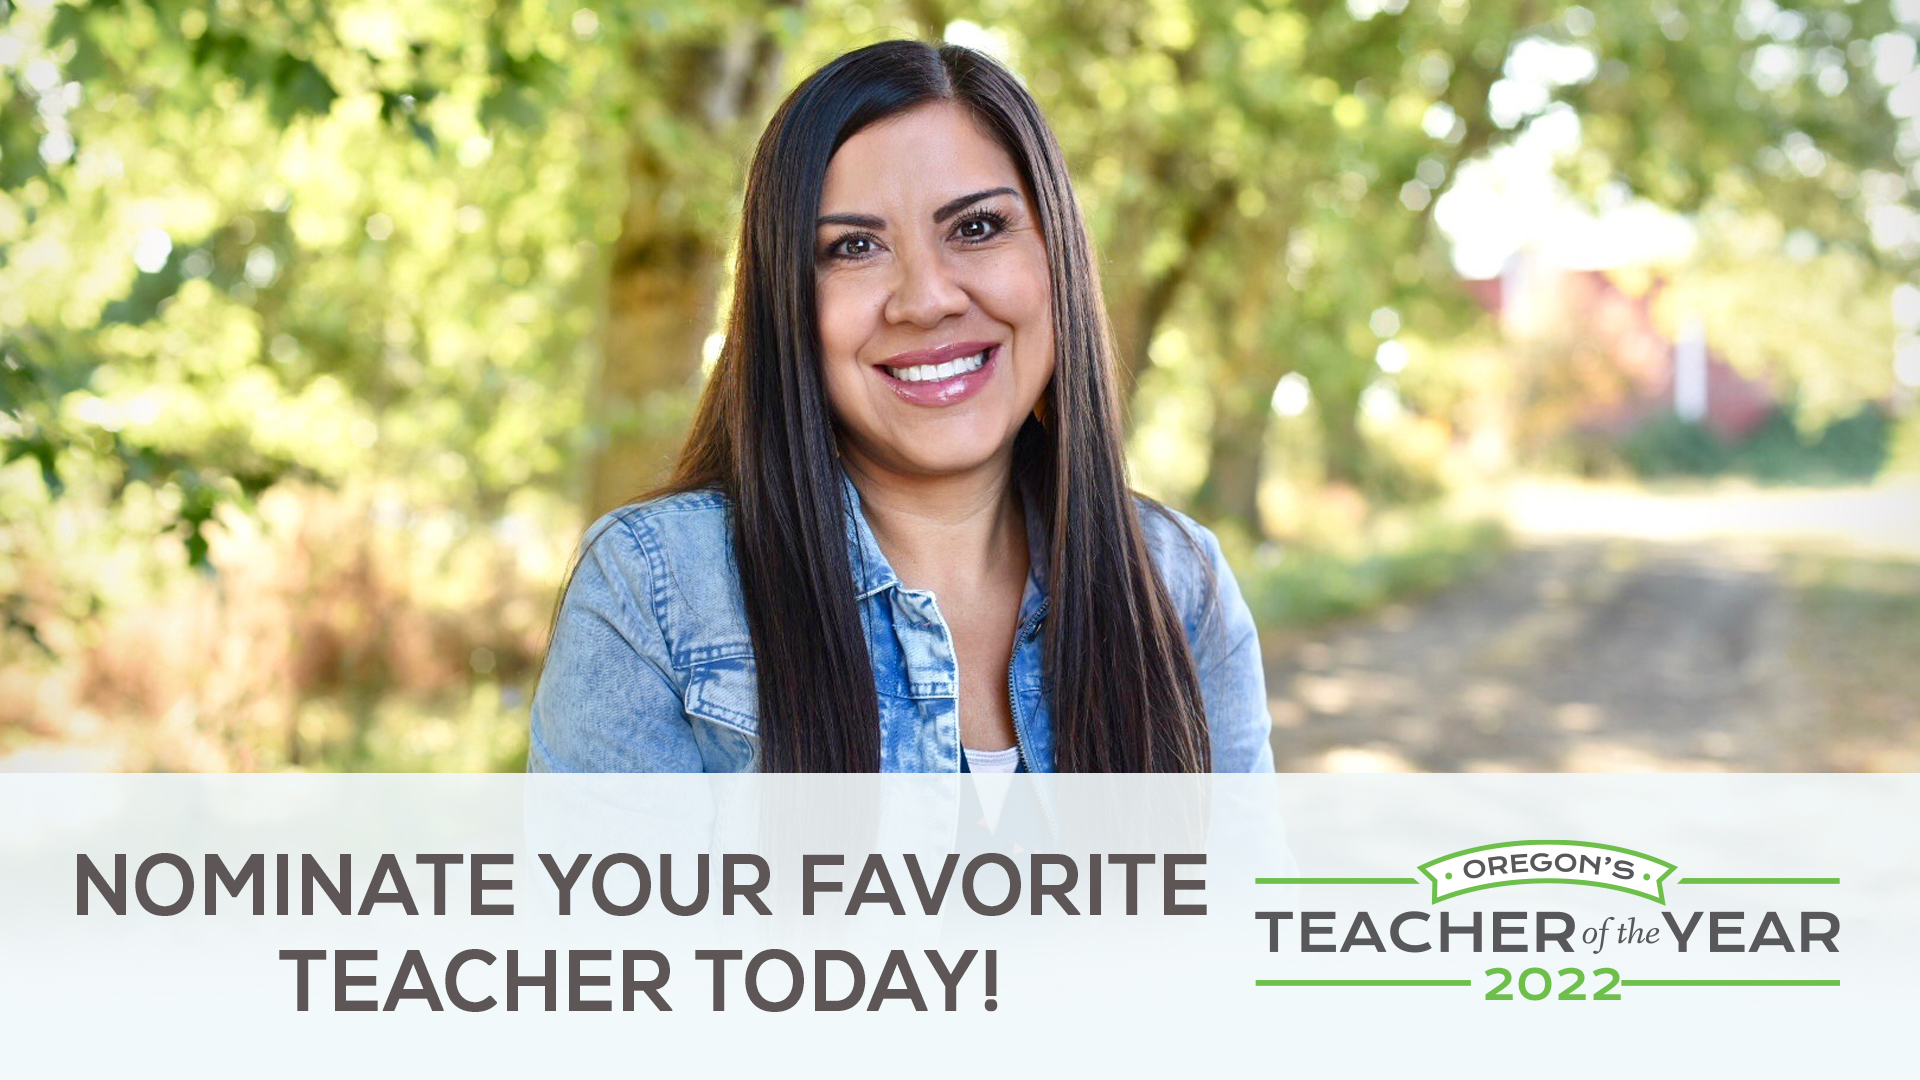 Oregon Regional Teacher of the Year Nominations are Now Open